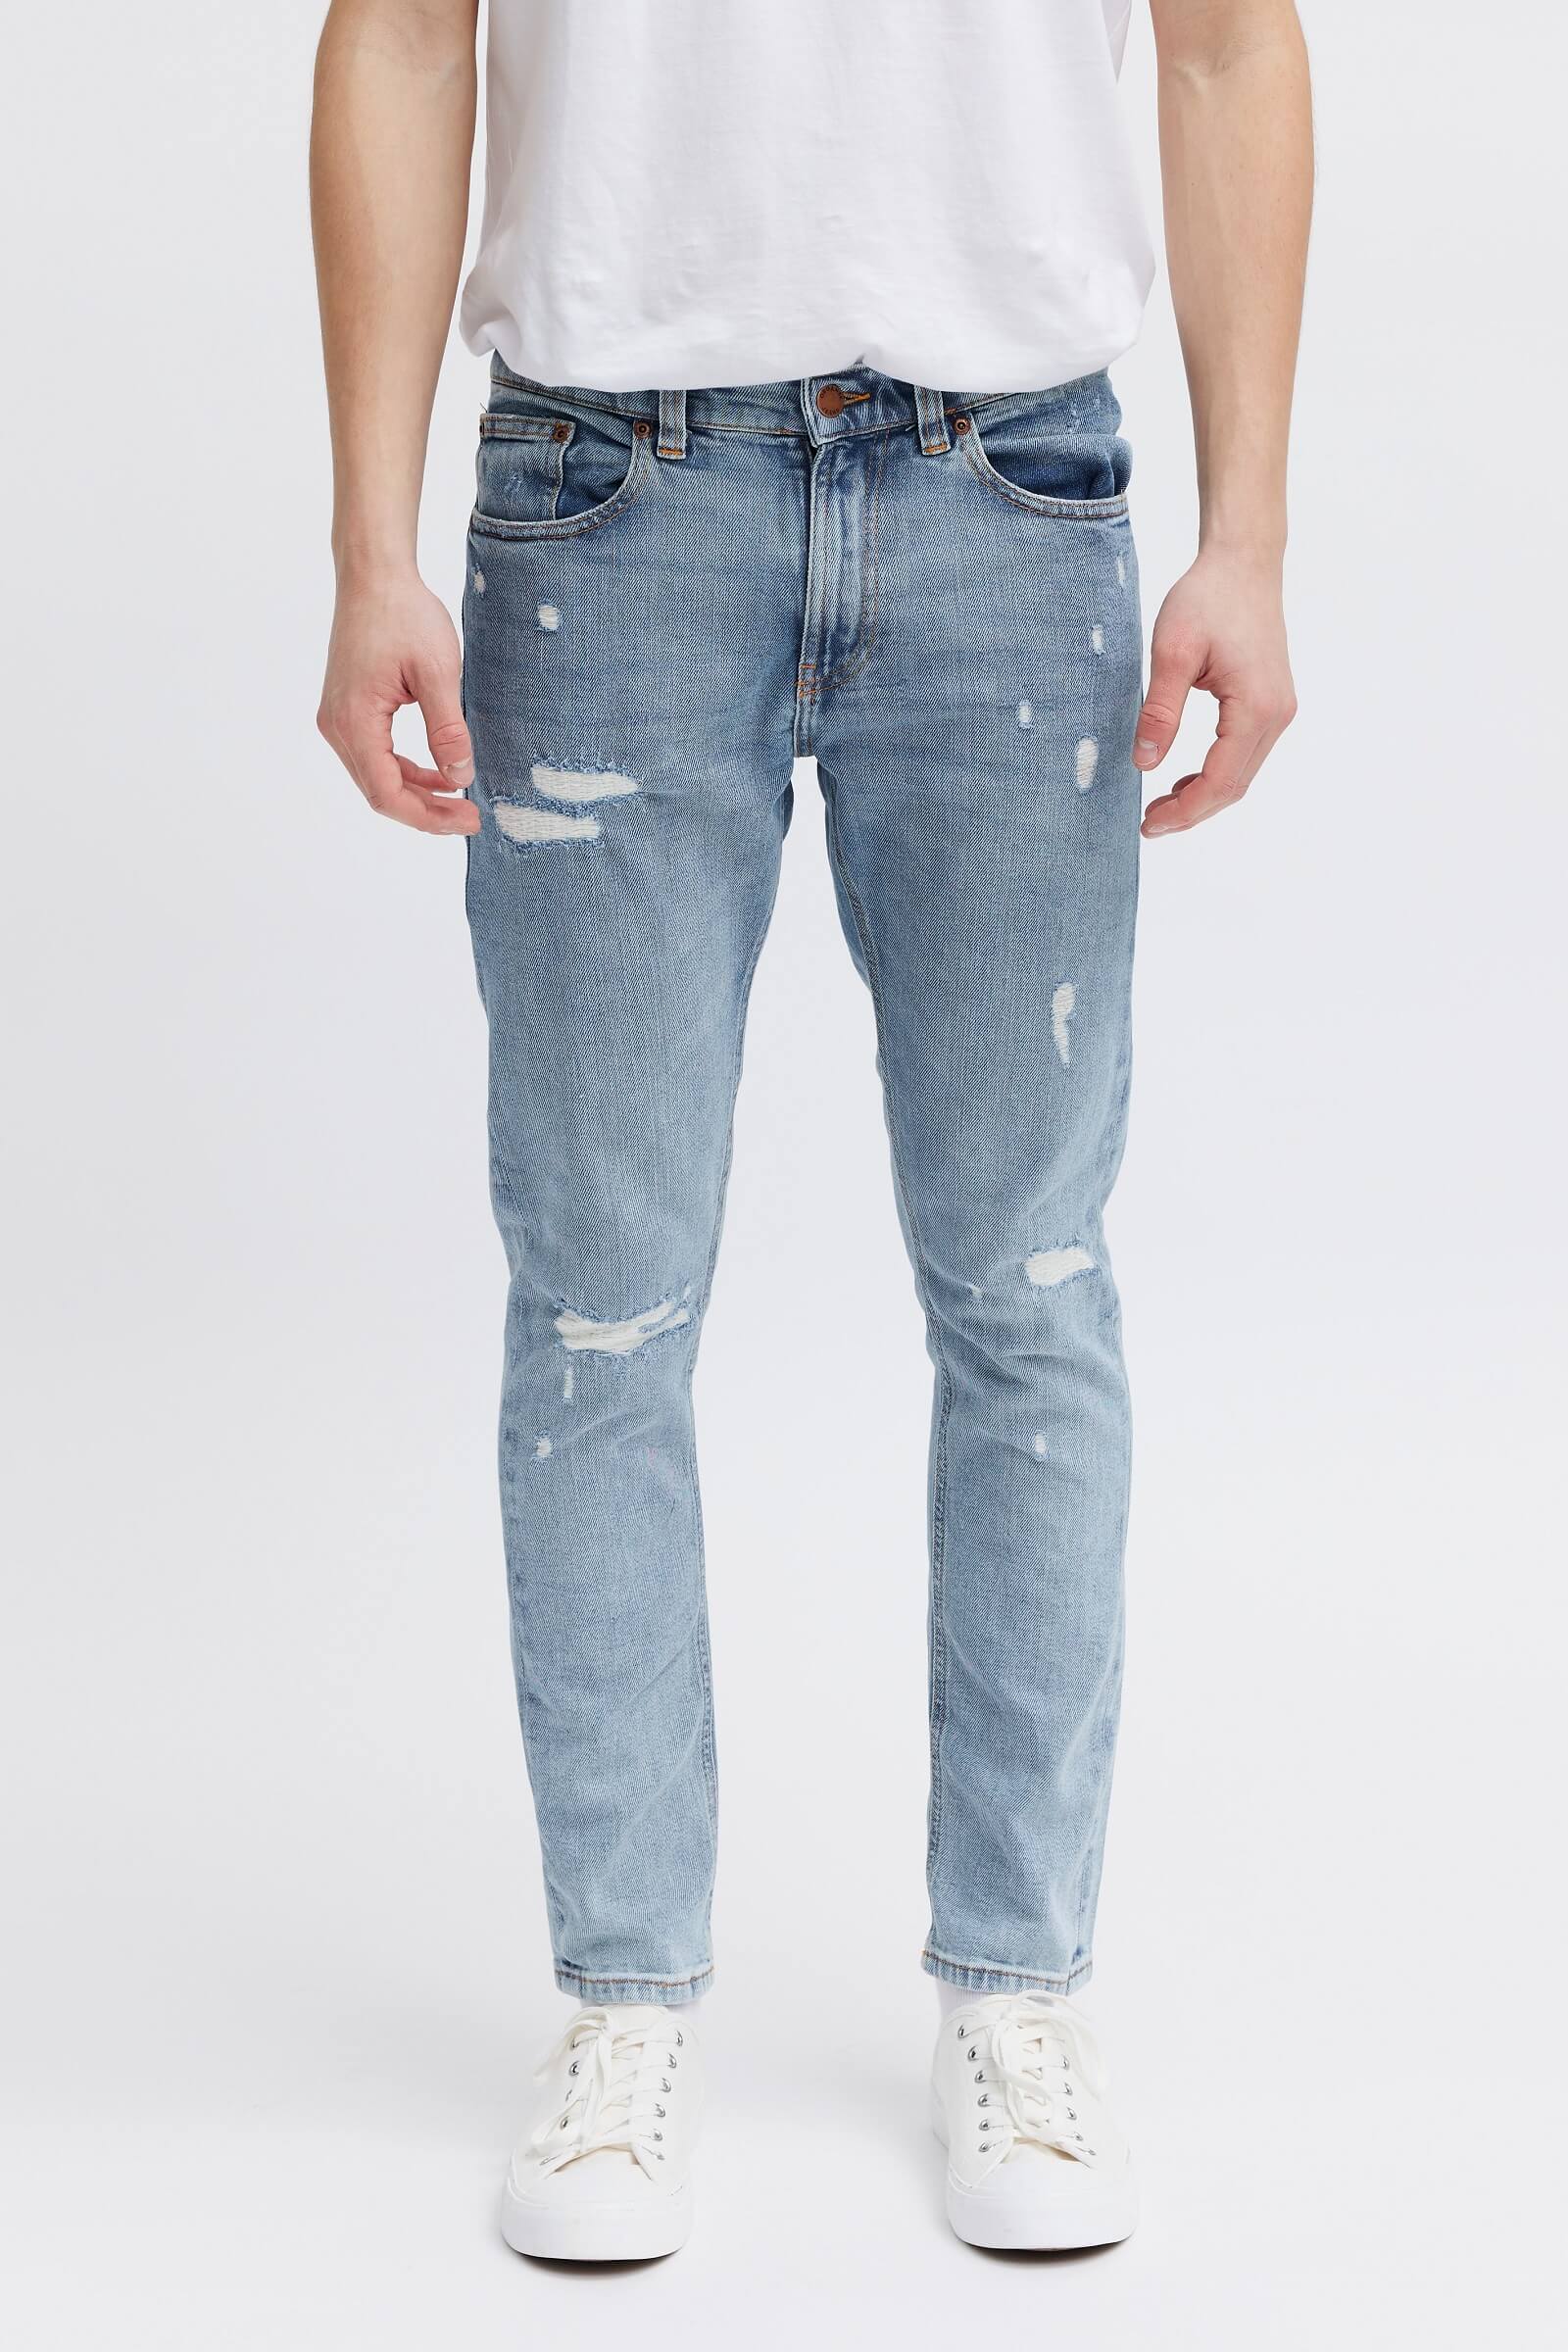 Organic ripped jeans for men